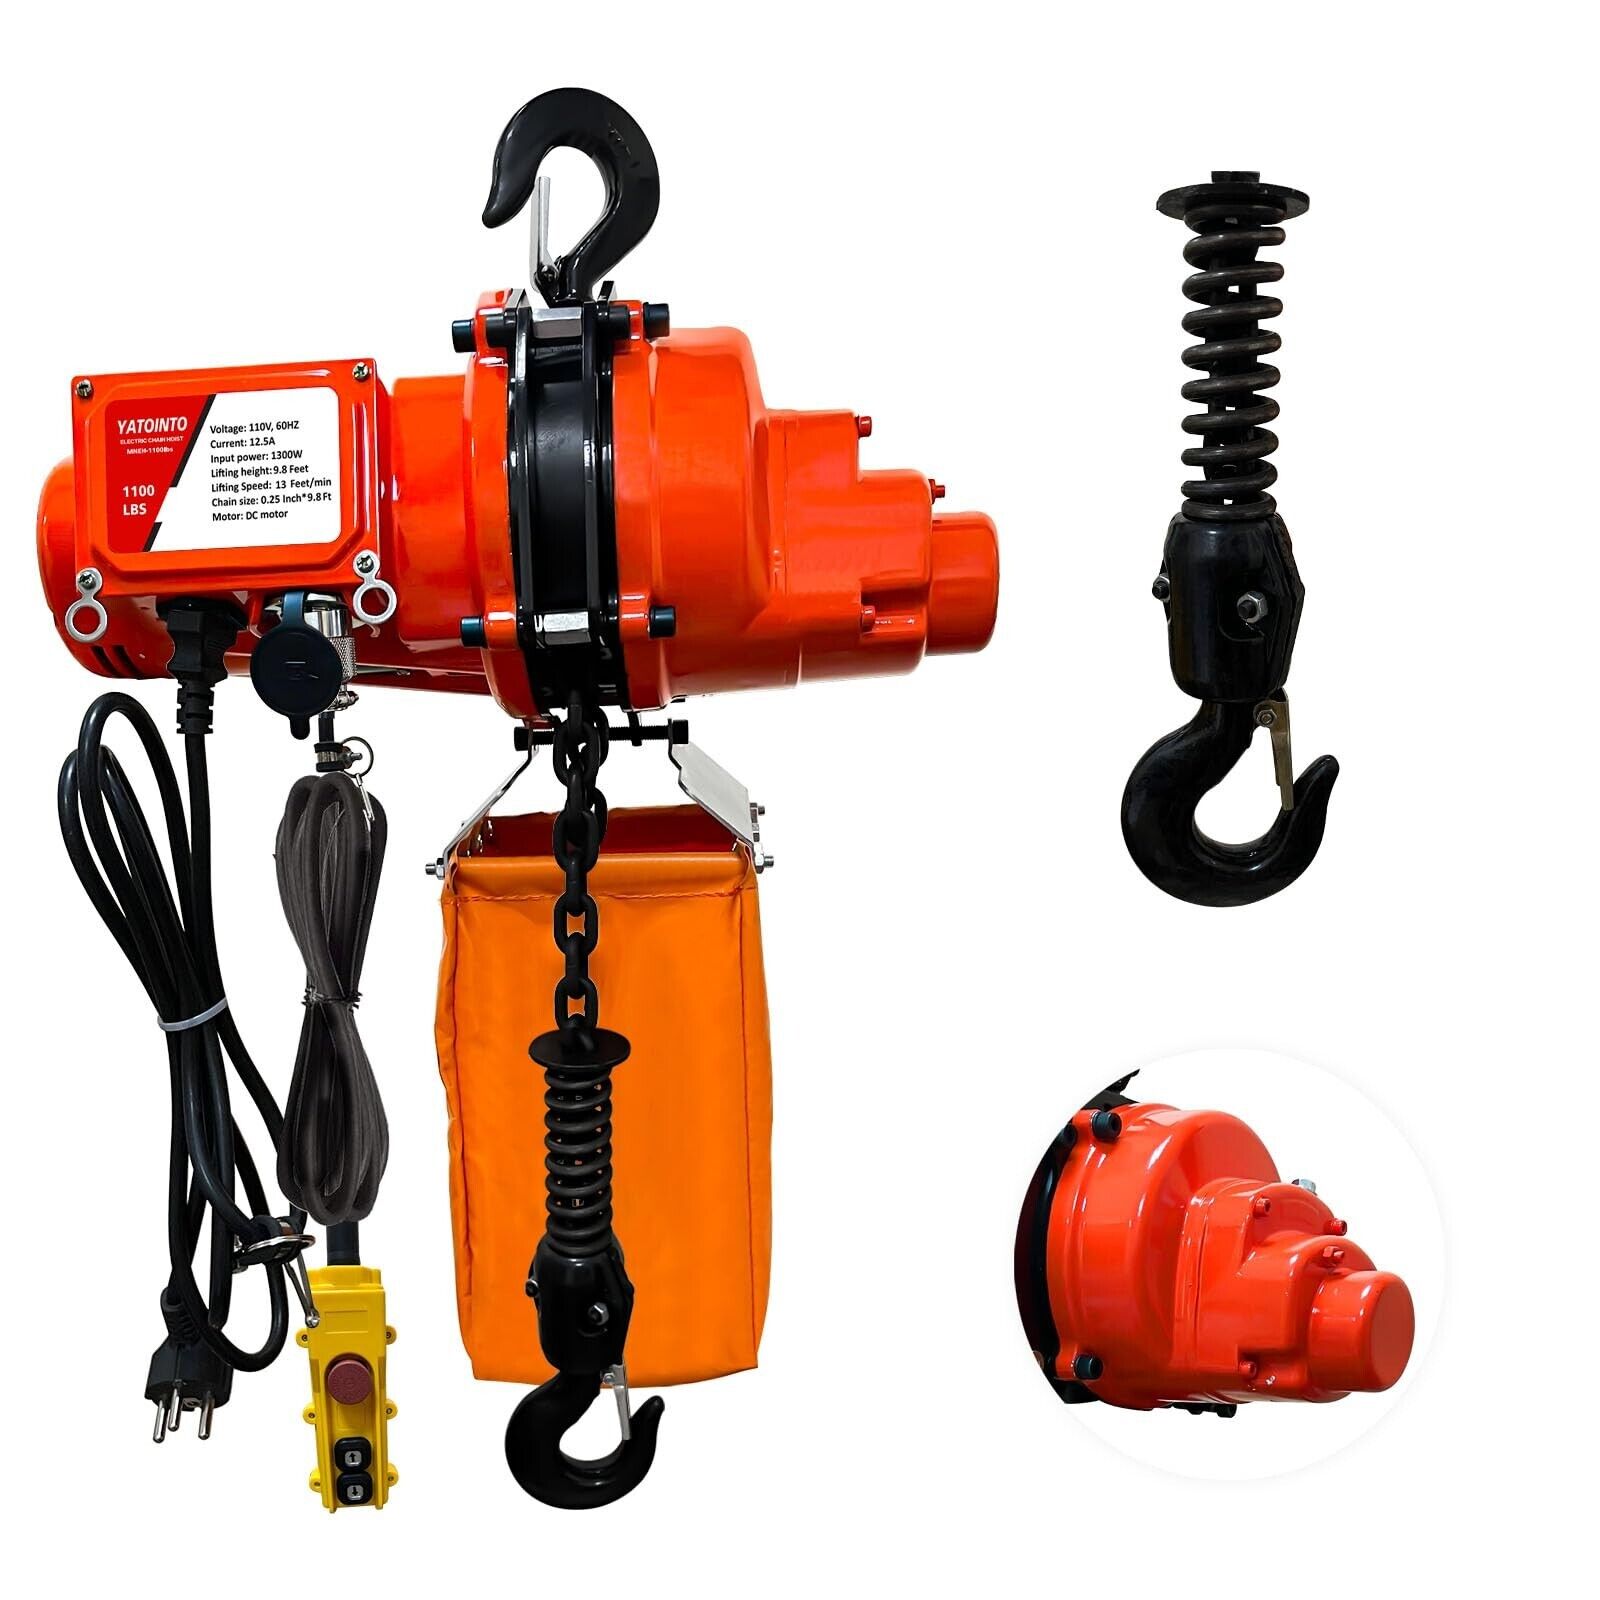 Electric Chain Hoist 1100lbs Winch 10Ft Wired Remote Control